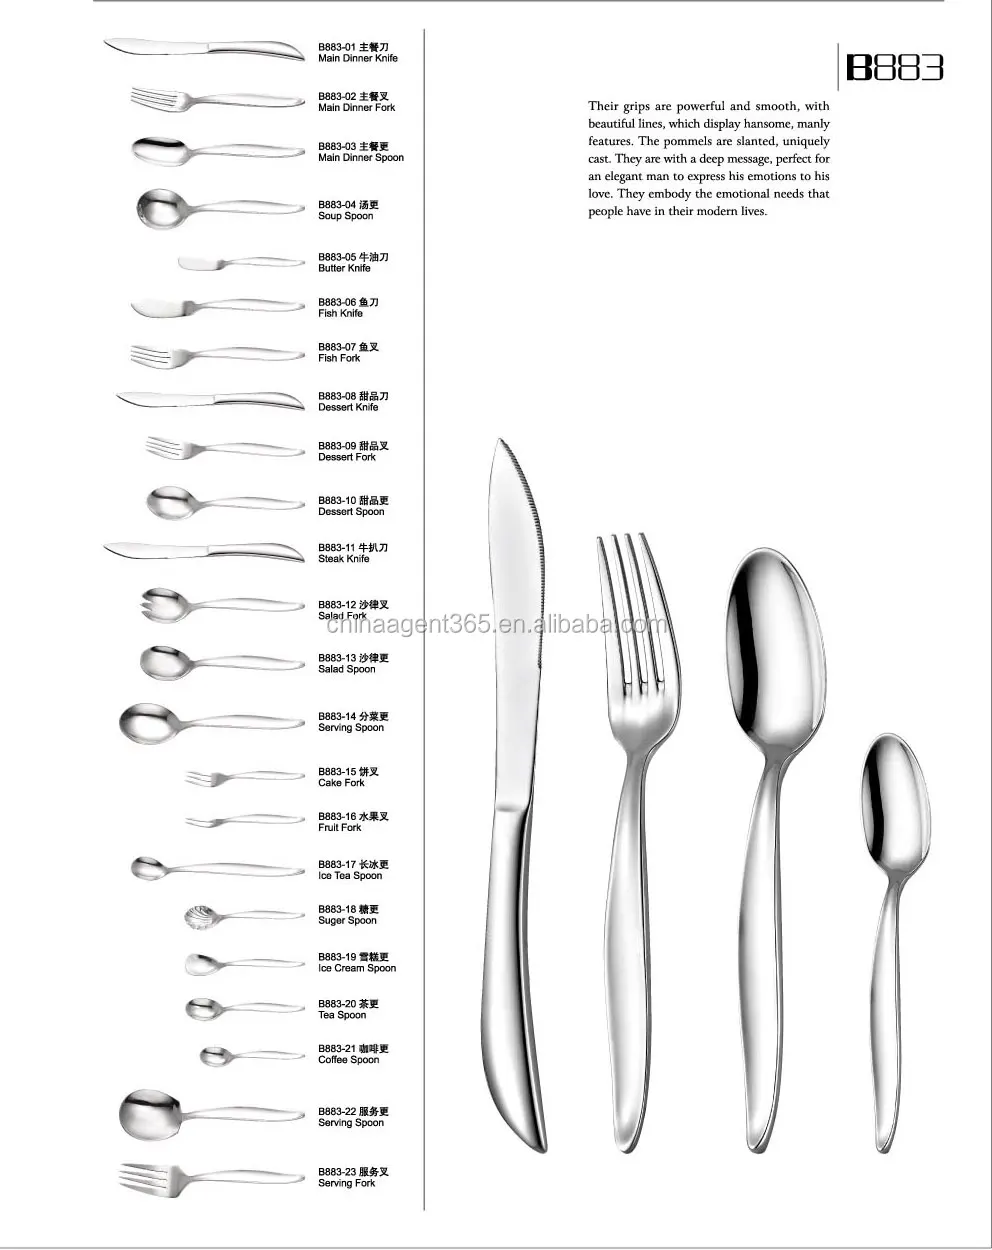 kinds of spoon and fork